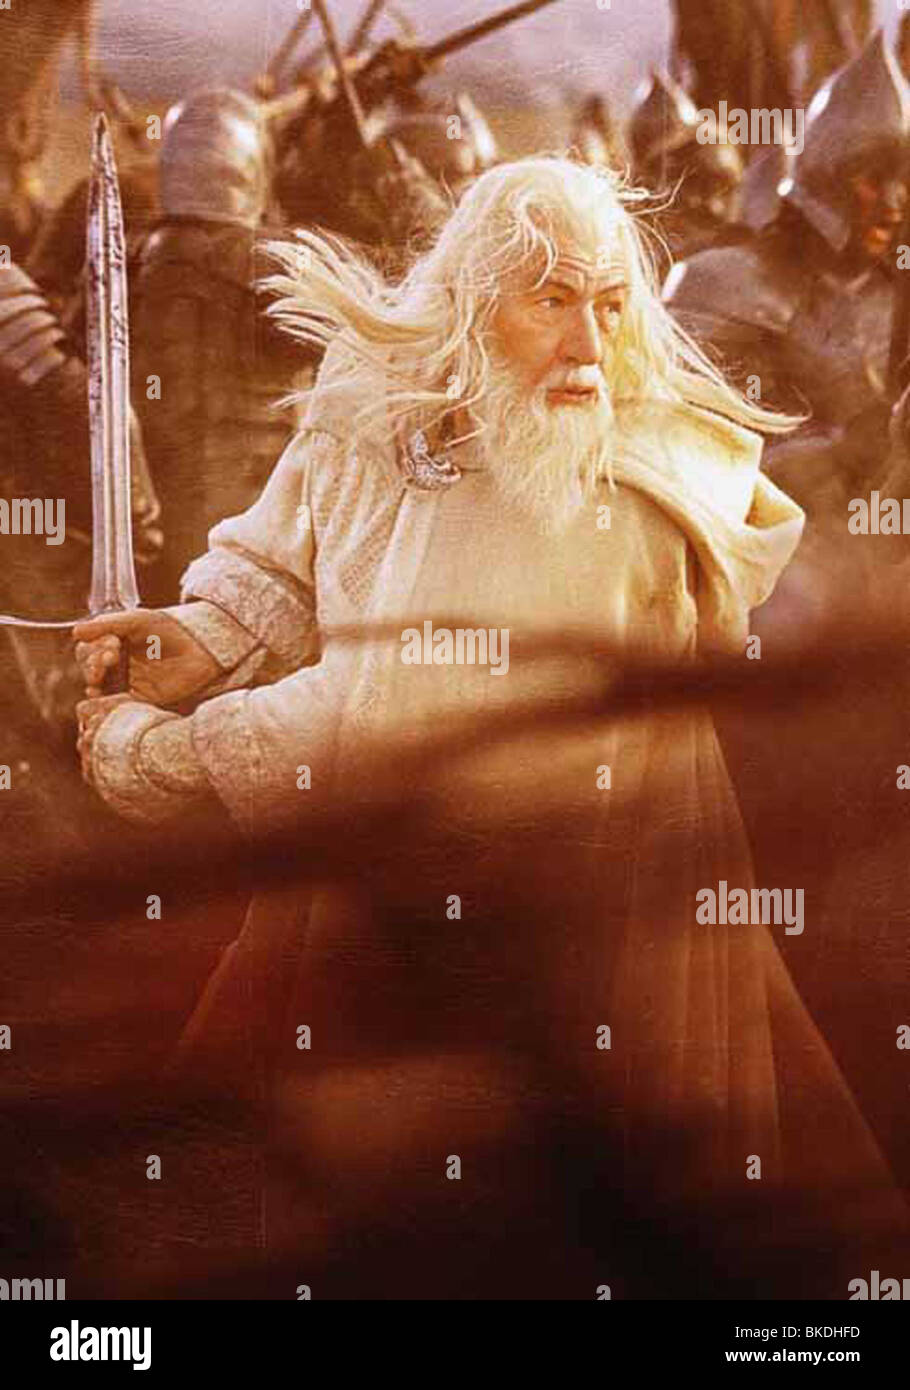 THE LORD OF THE RINGS: THE RETURN OF THE KING (2003) IAN MCKELLEN, GANDALF ROTK 001-013 Stock Photo